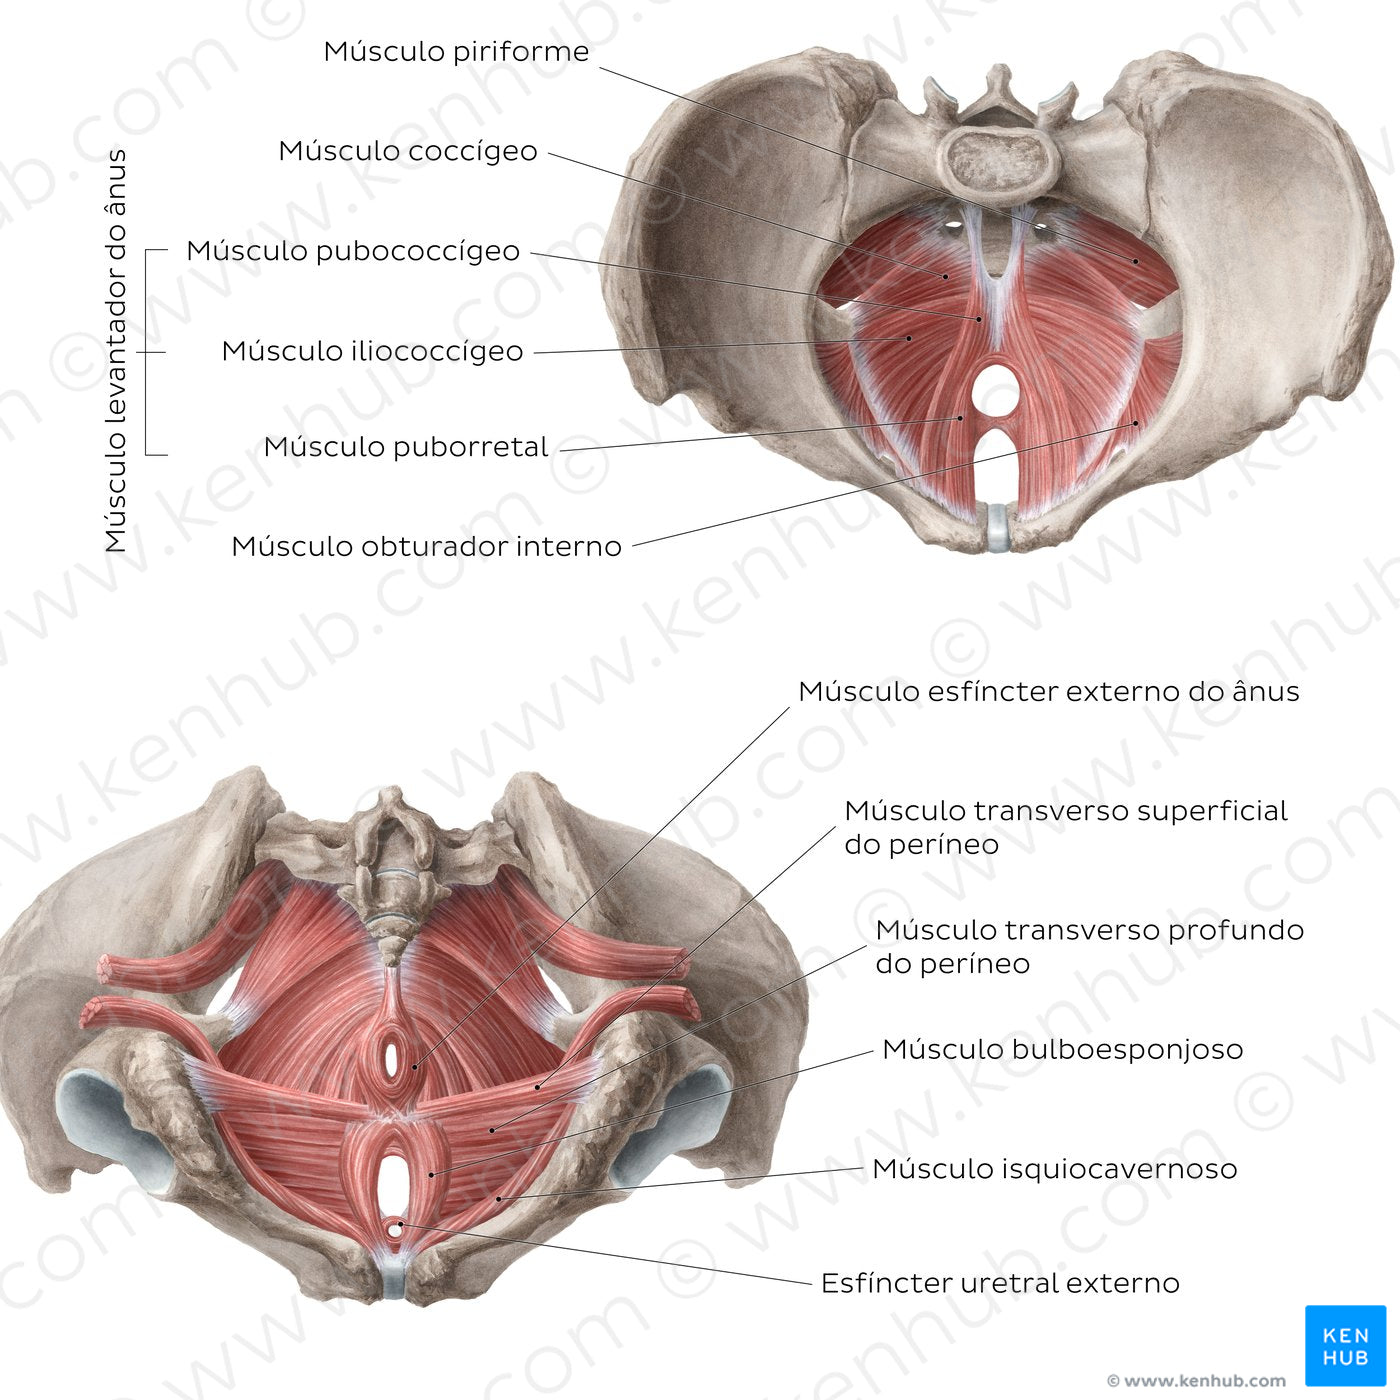 Muscles of the pelvic floor (Portuguese)